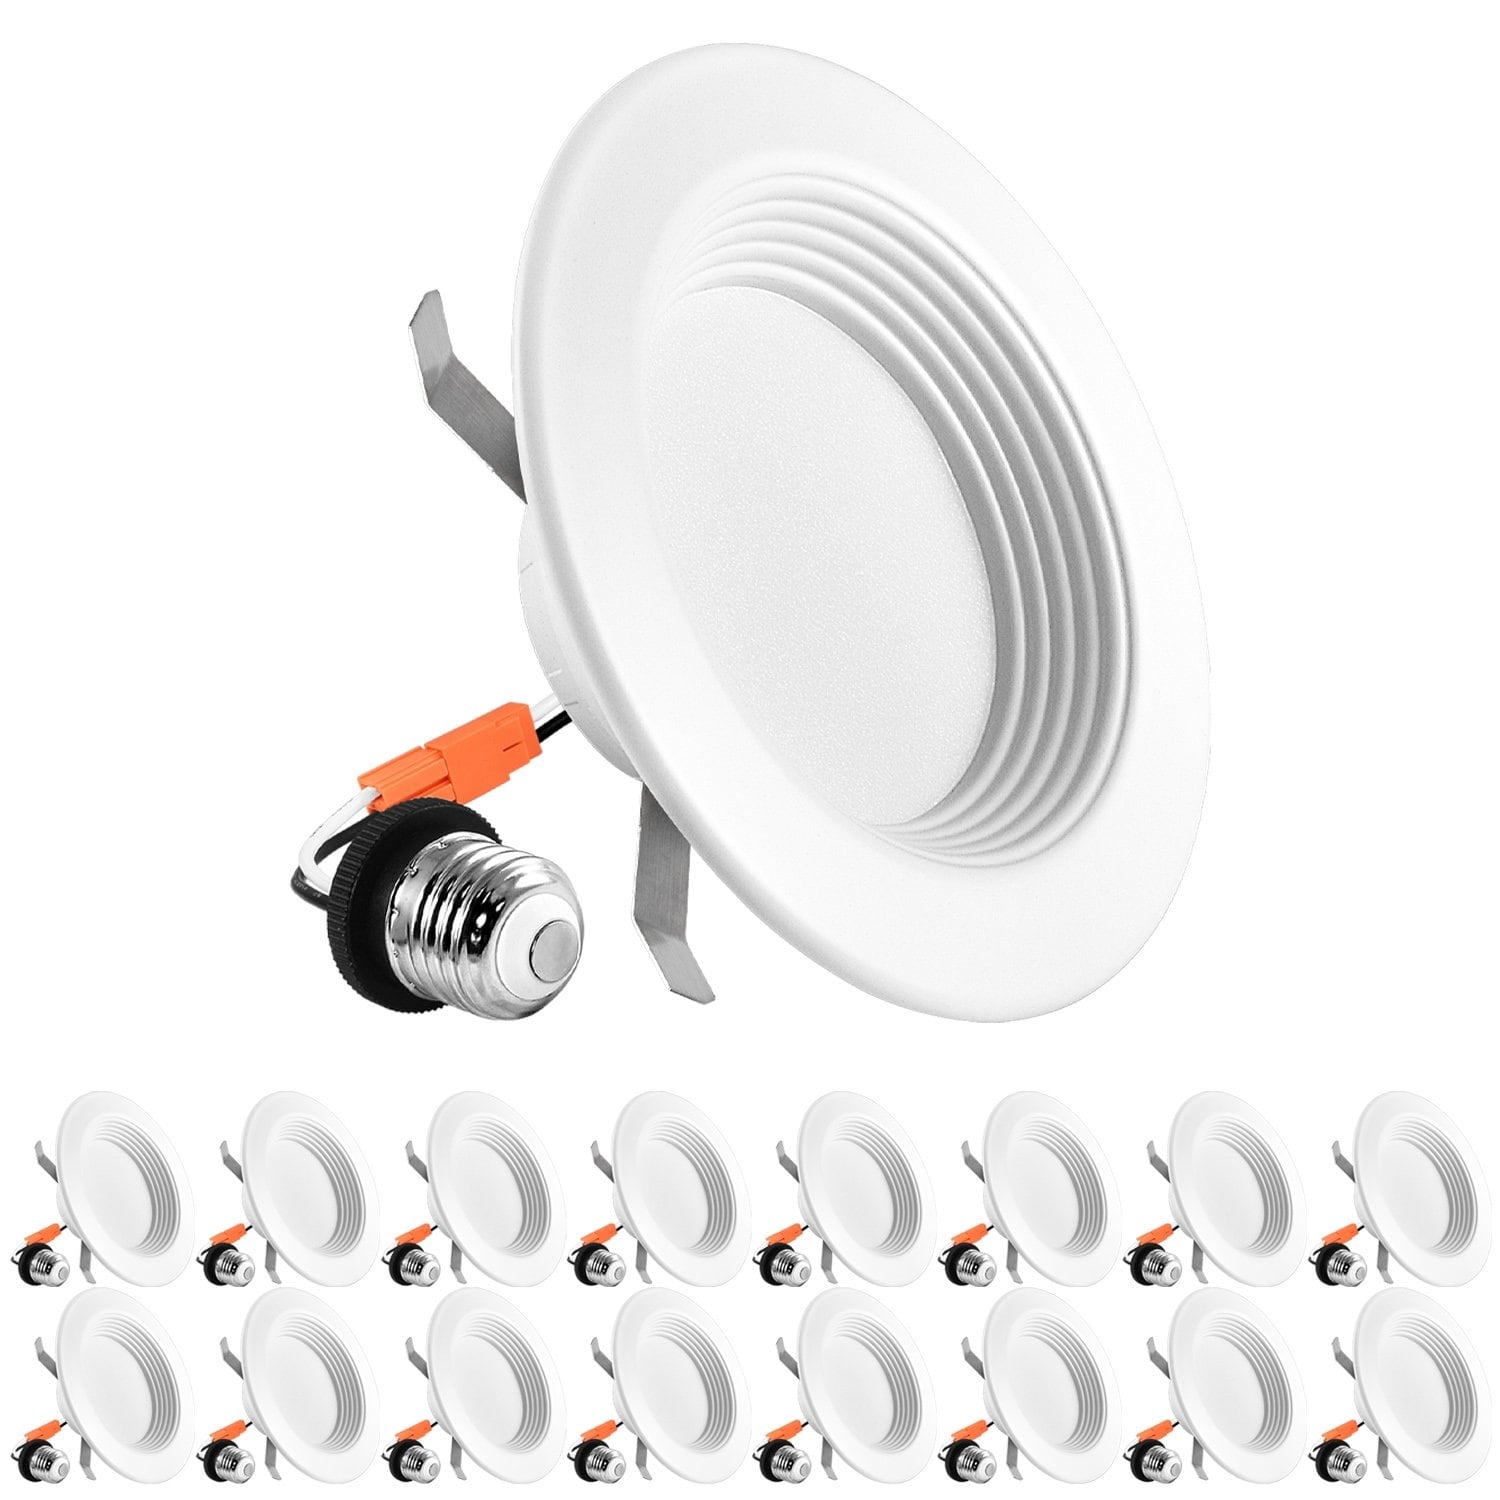 Luxrite 4 Inch Dimmable LED Recessed Lights, 10W, 2700K, 670lm, 60W Equivalent, Baffle Trim, ETL & Damp Rated (16 Pack)